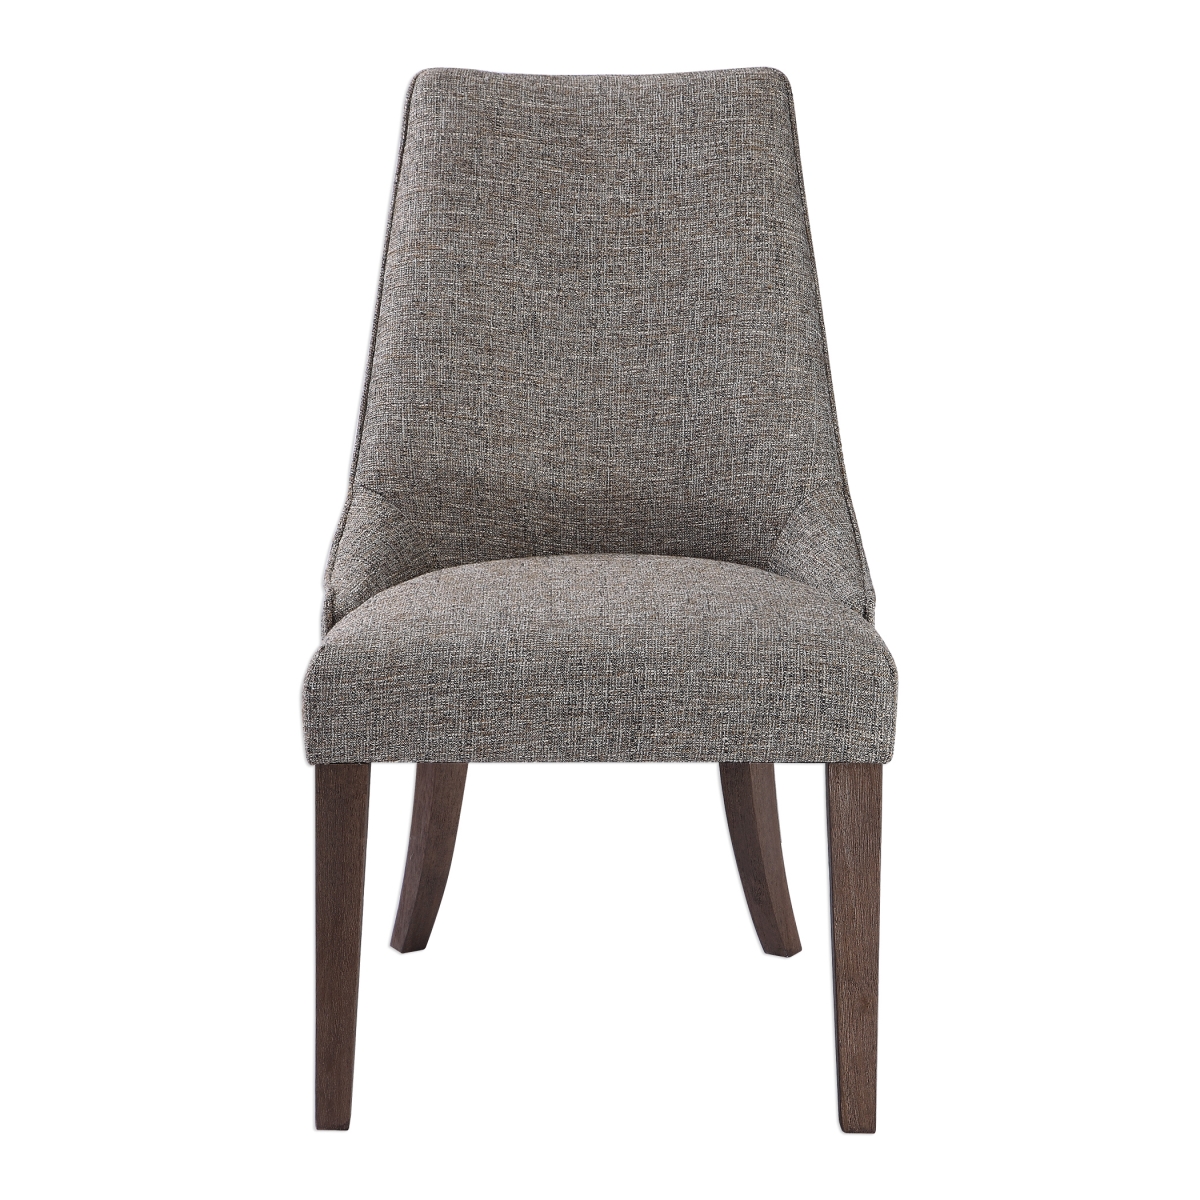 Picture of 212 Main 23494 19 in. Daxton Earth Tone Armless Chair